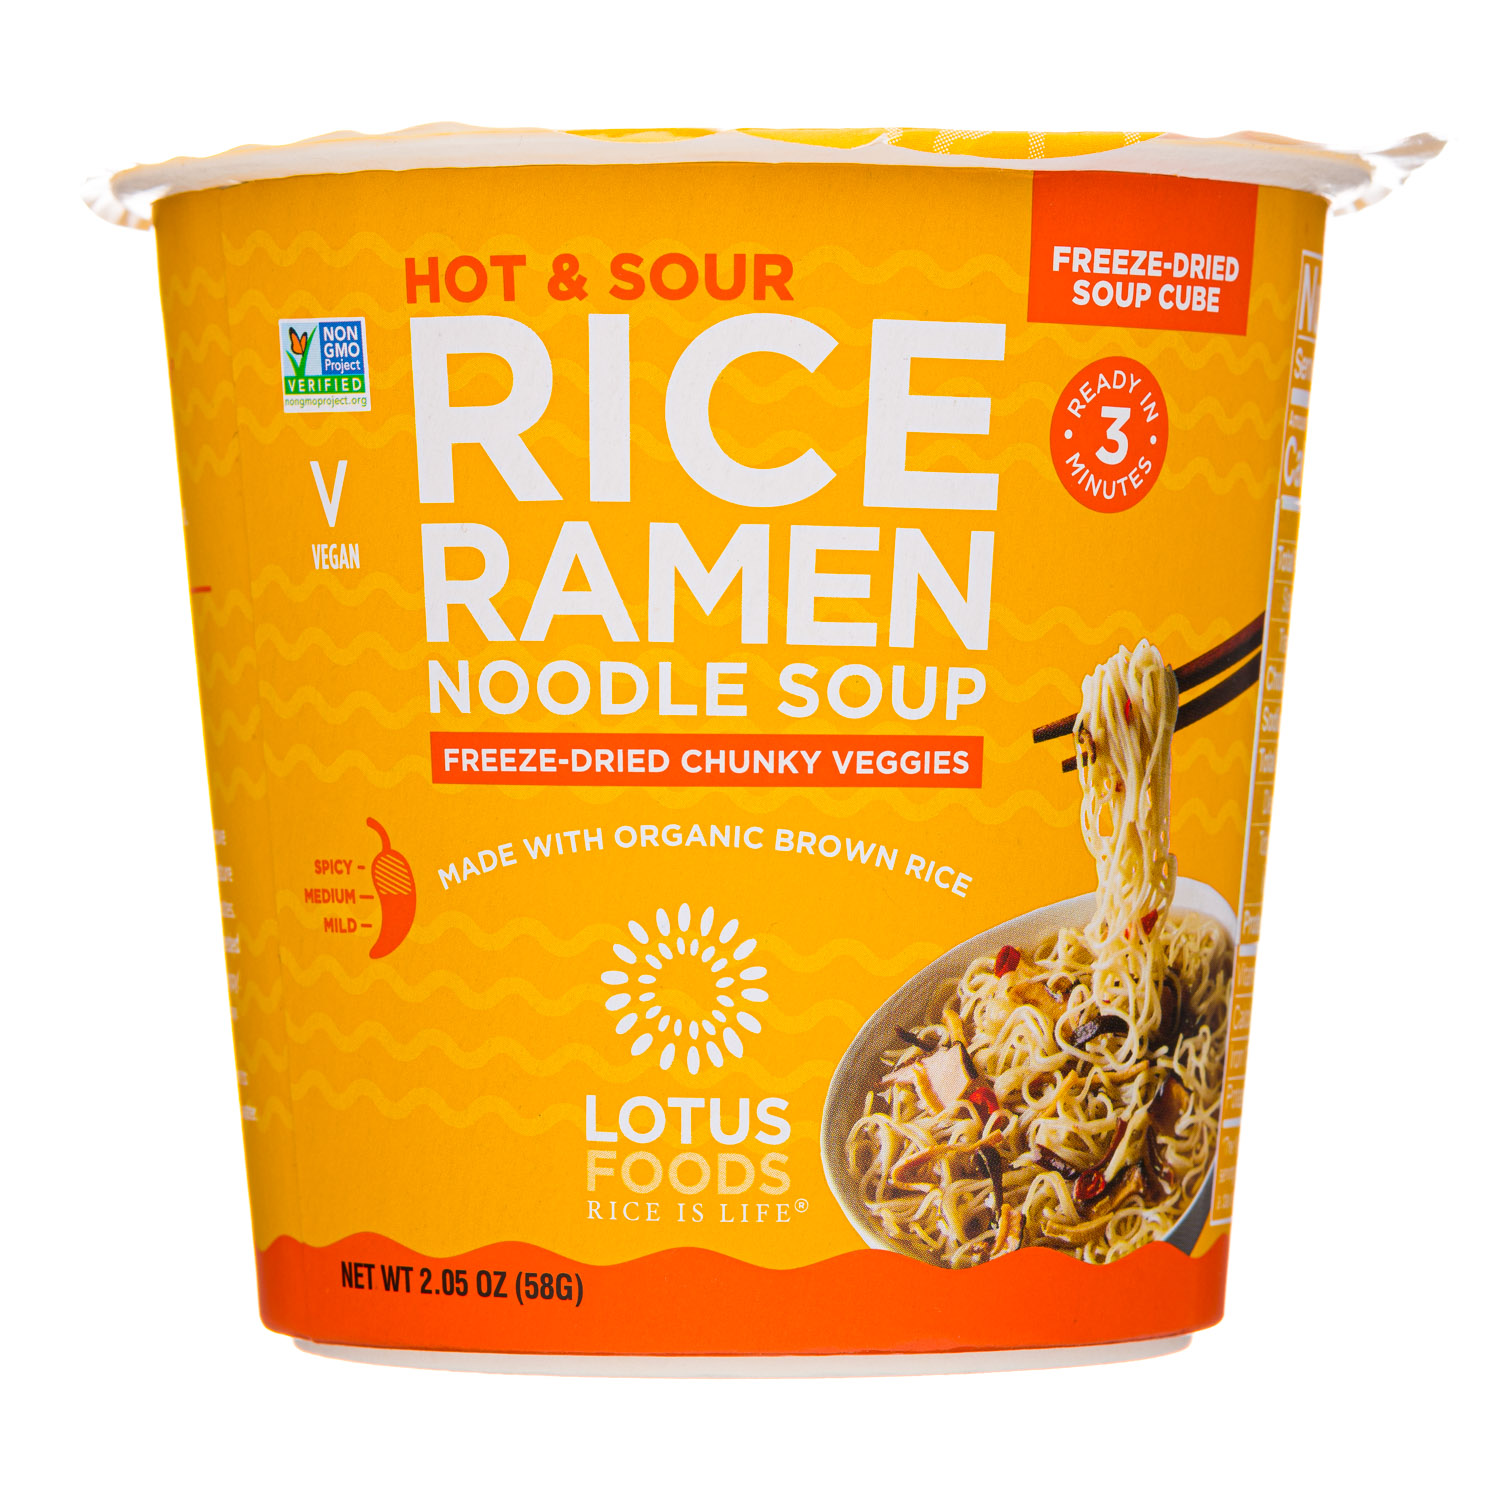 Lotus Foods Hot & Sour Rice Ramen Noodle Soup Cup With Freeze-Dried Chunky Veggies